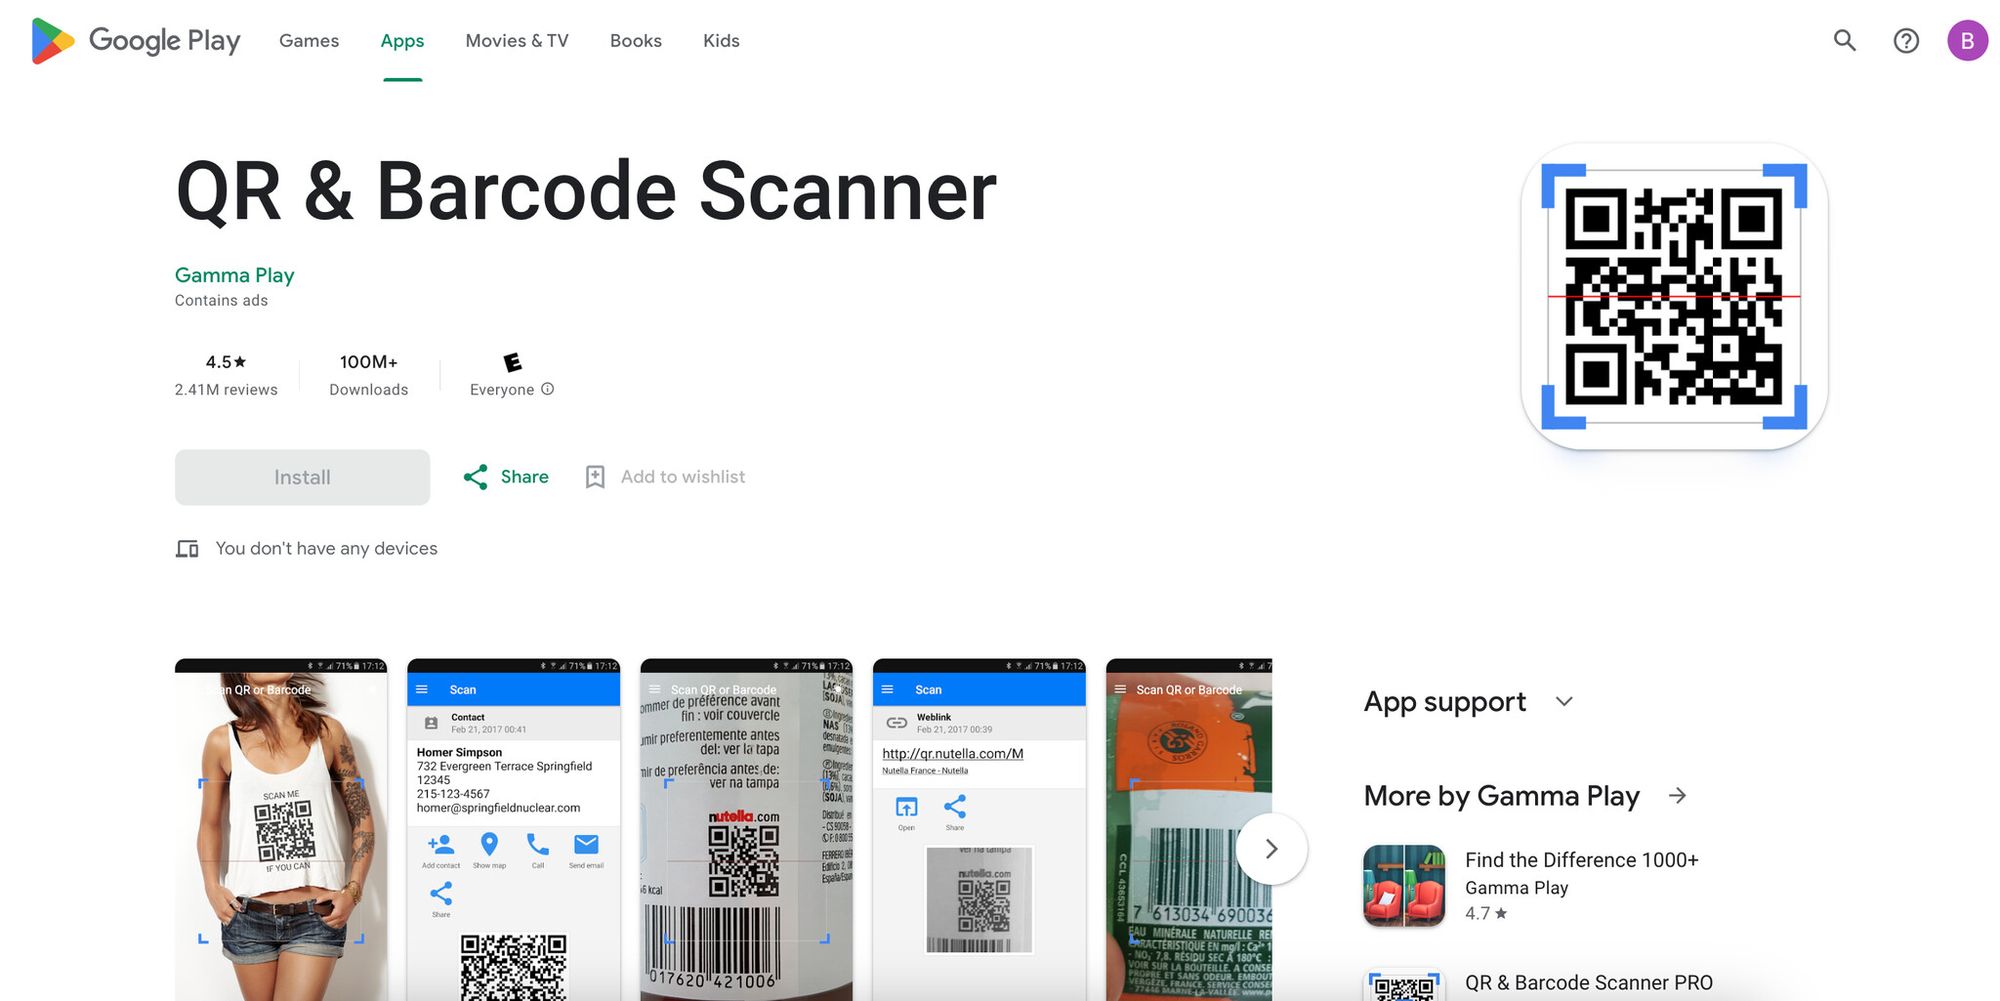 a screenshot of Google Play app page of QR & Barcode Scanner by Gamma Play